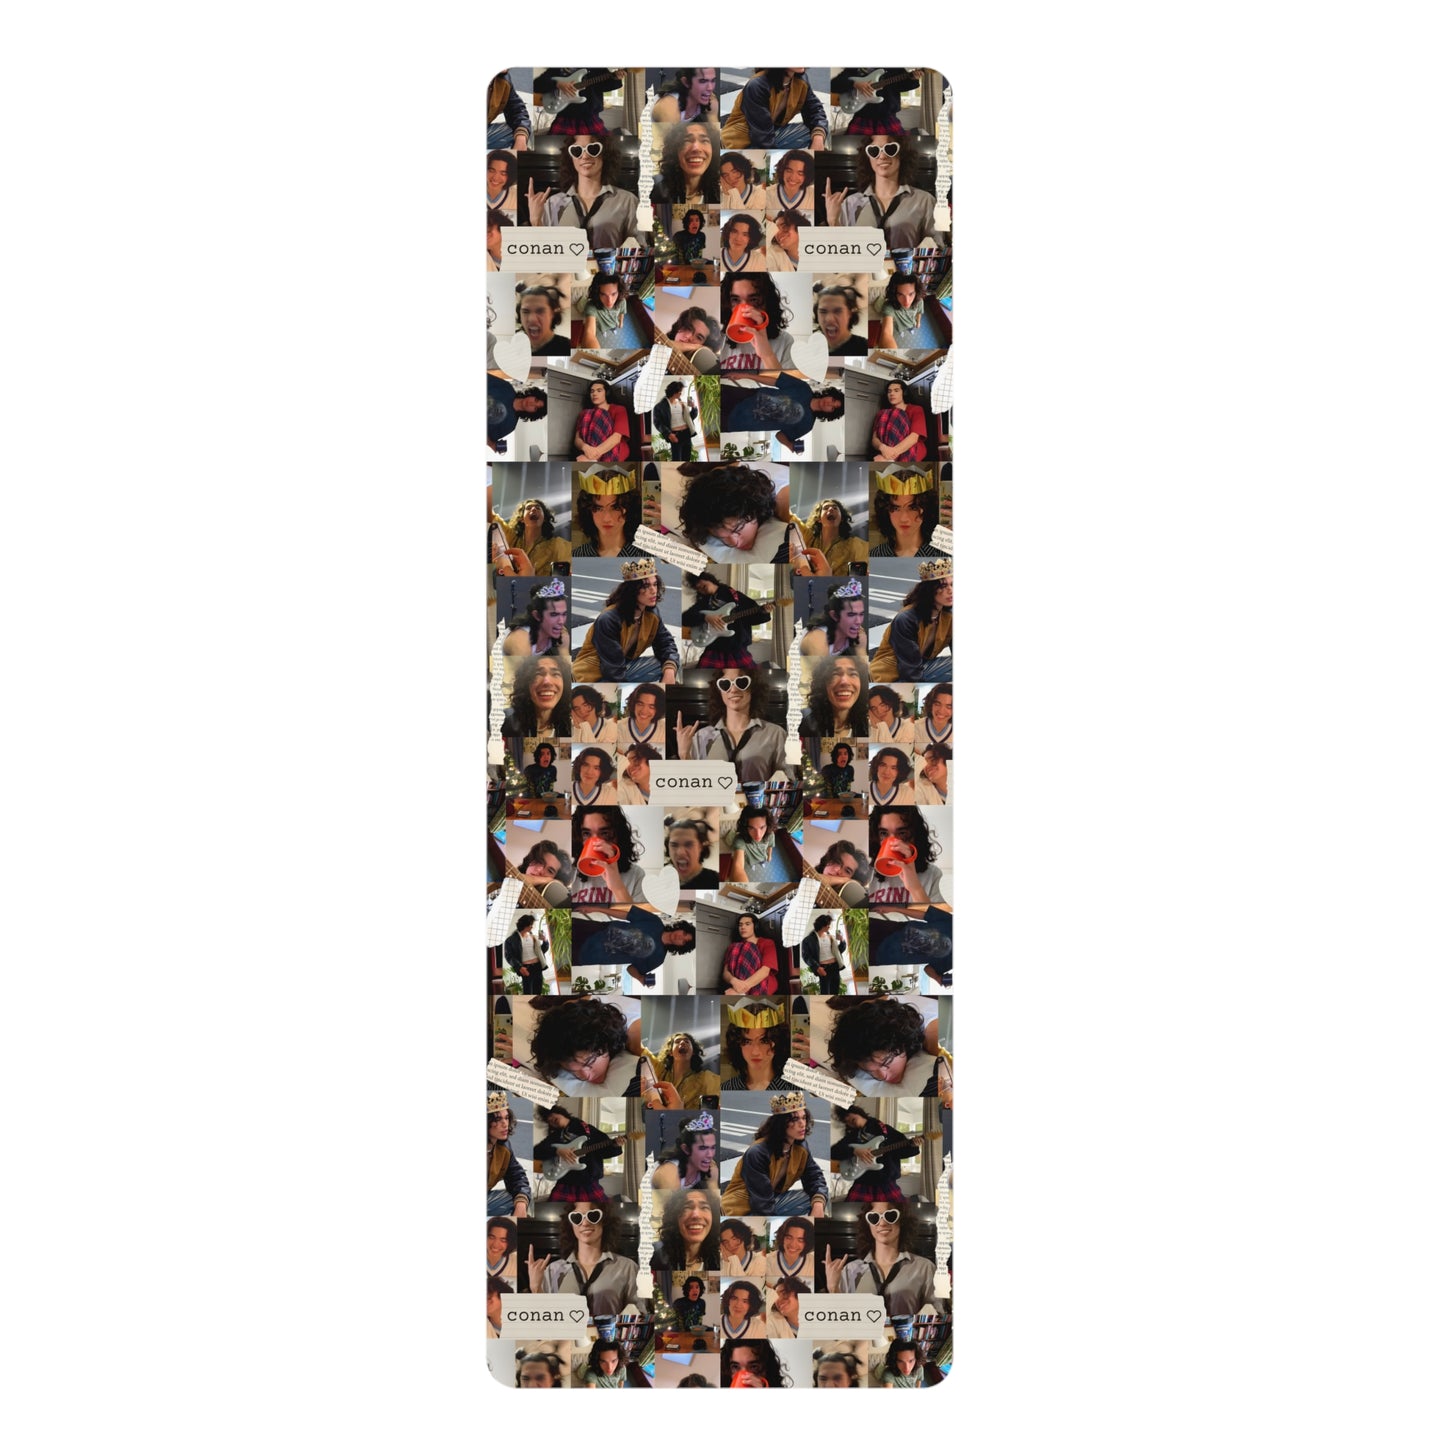 Conan Grey Being Cute Photo Collage Rubber Yoga Mat